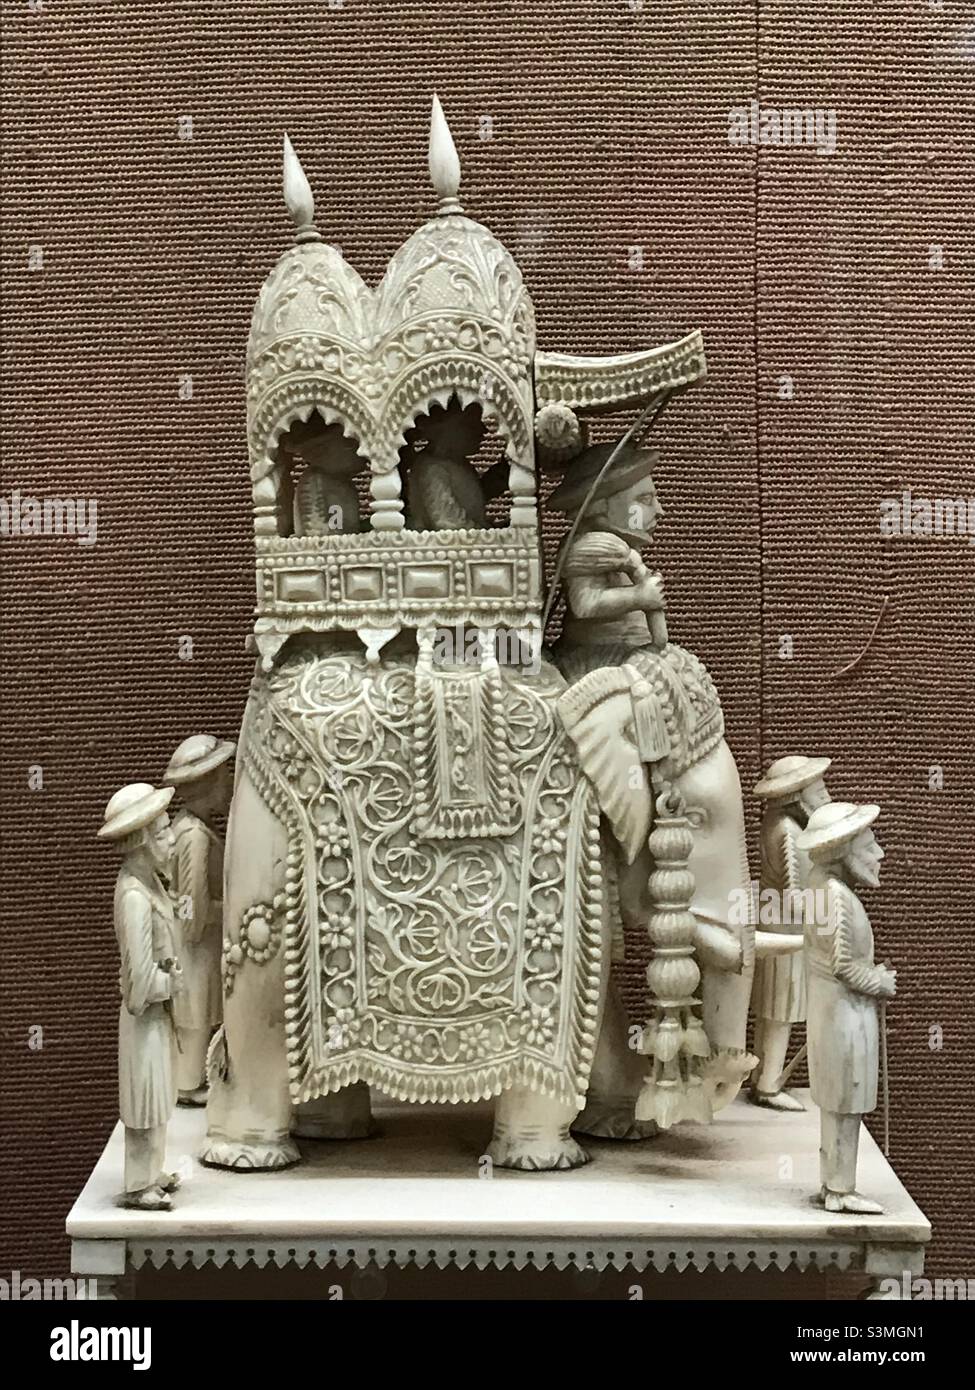 Indian heritage : Ivory carved piece from royal family Stock Photo